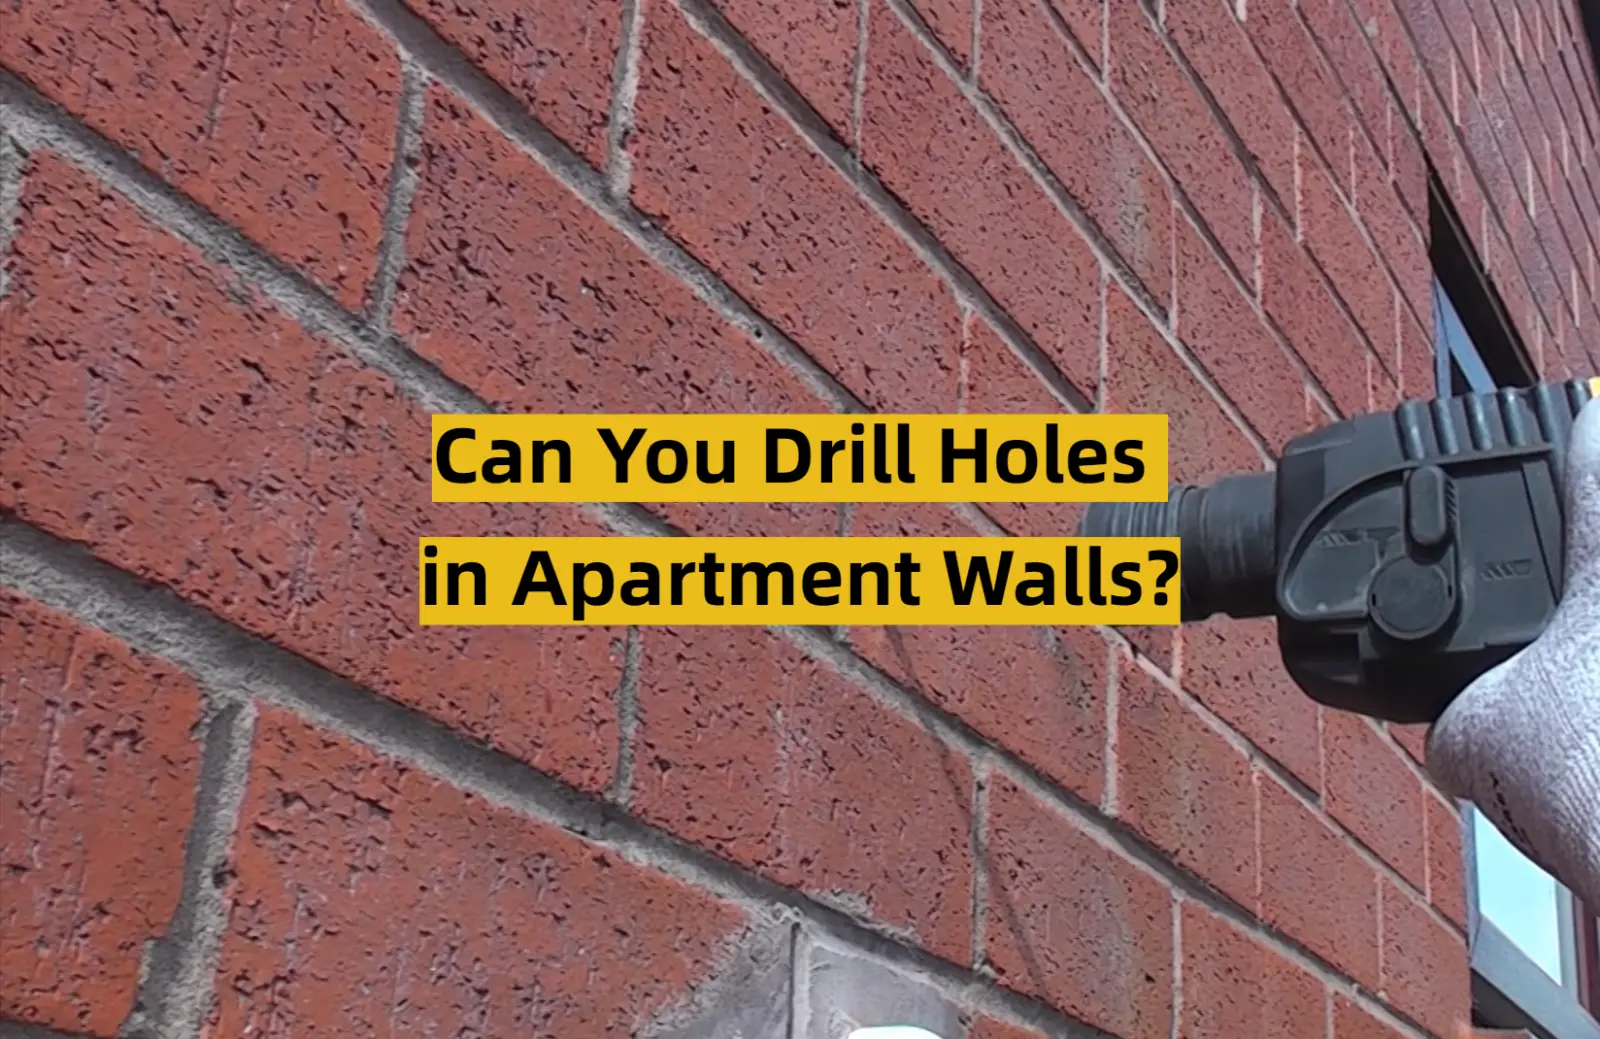 Can You Drill Holes in Apartment Walls?